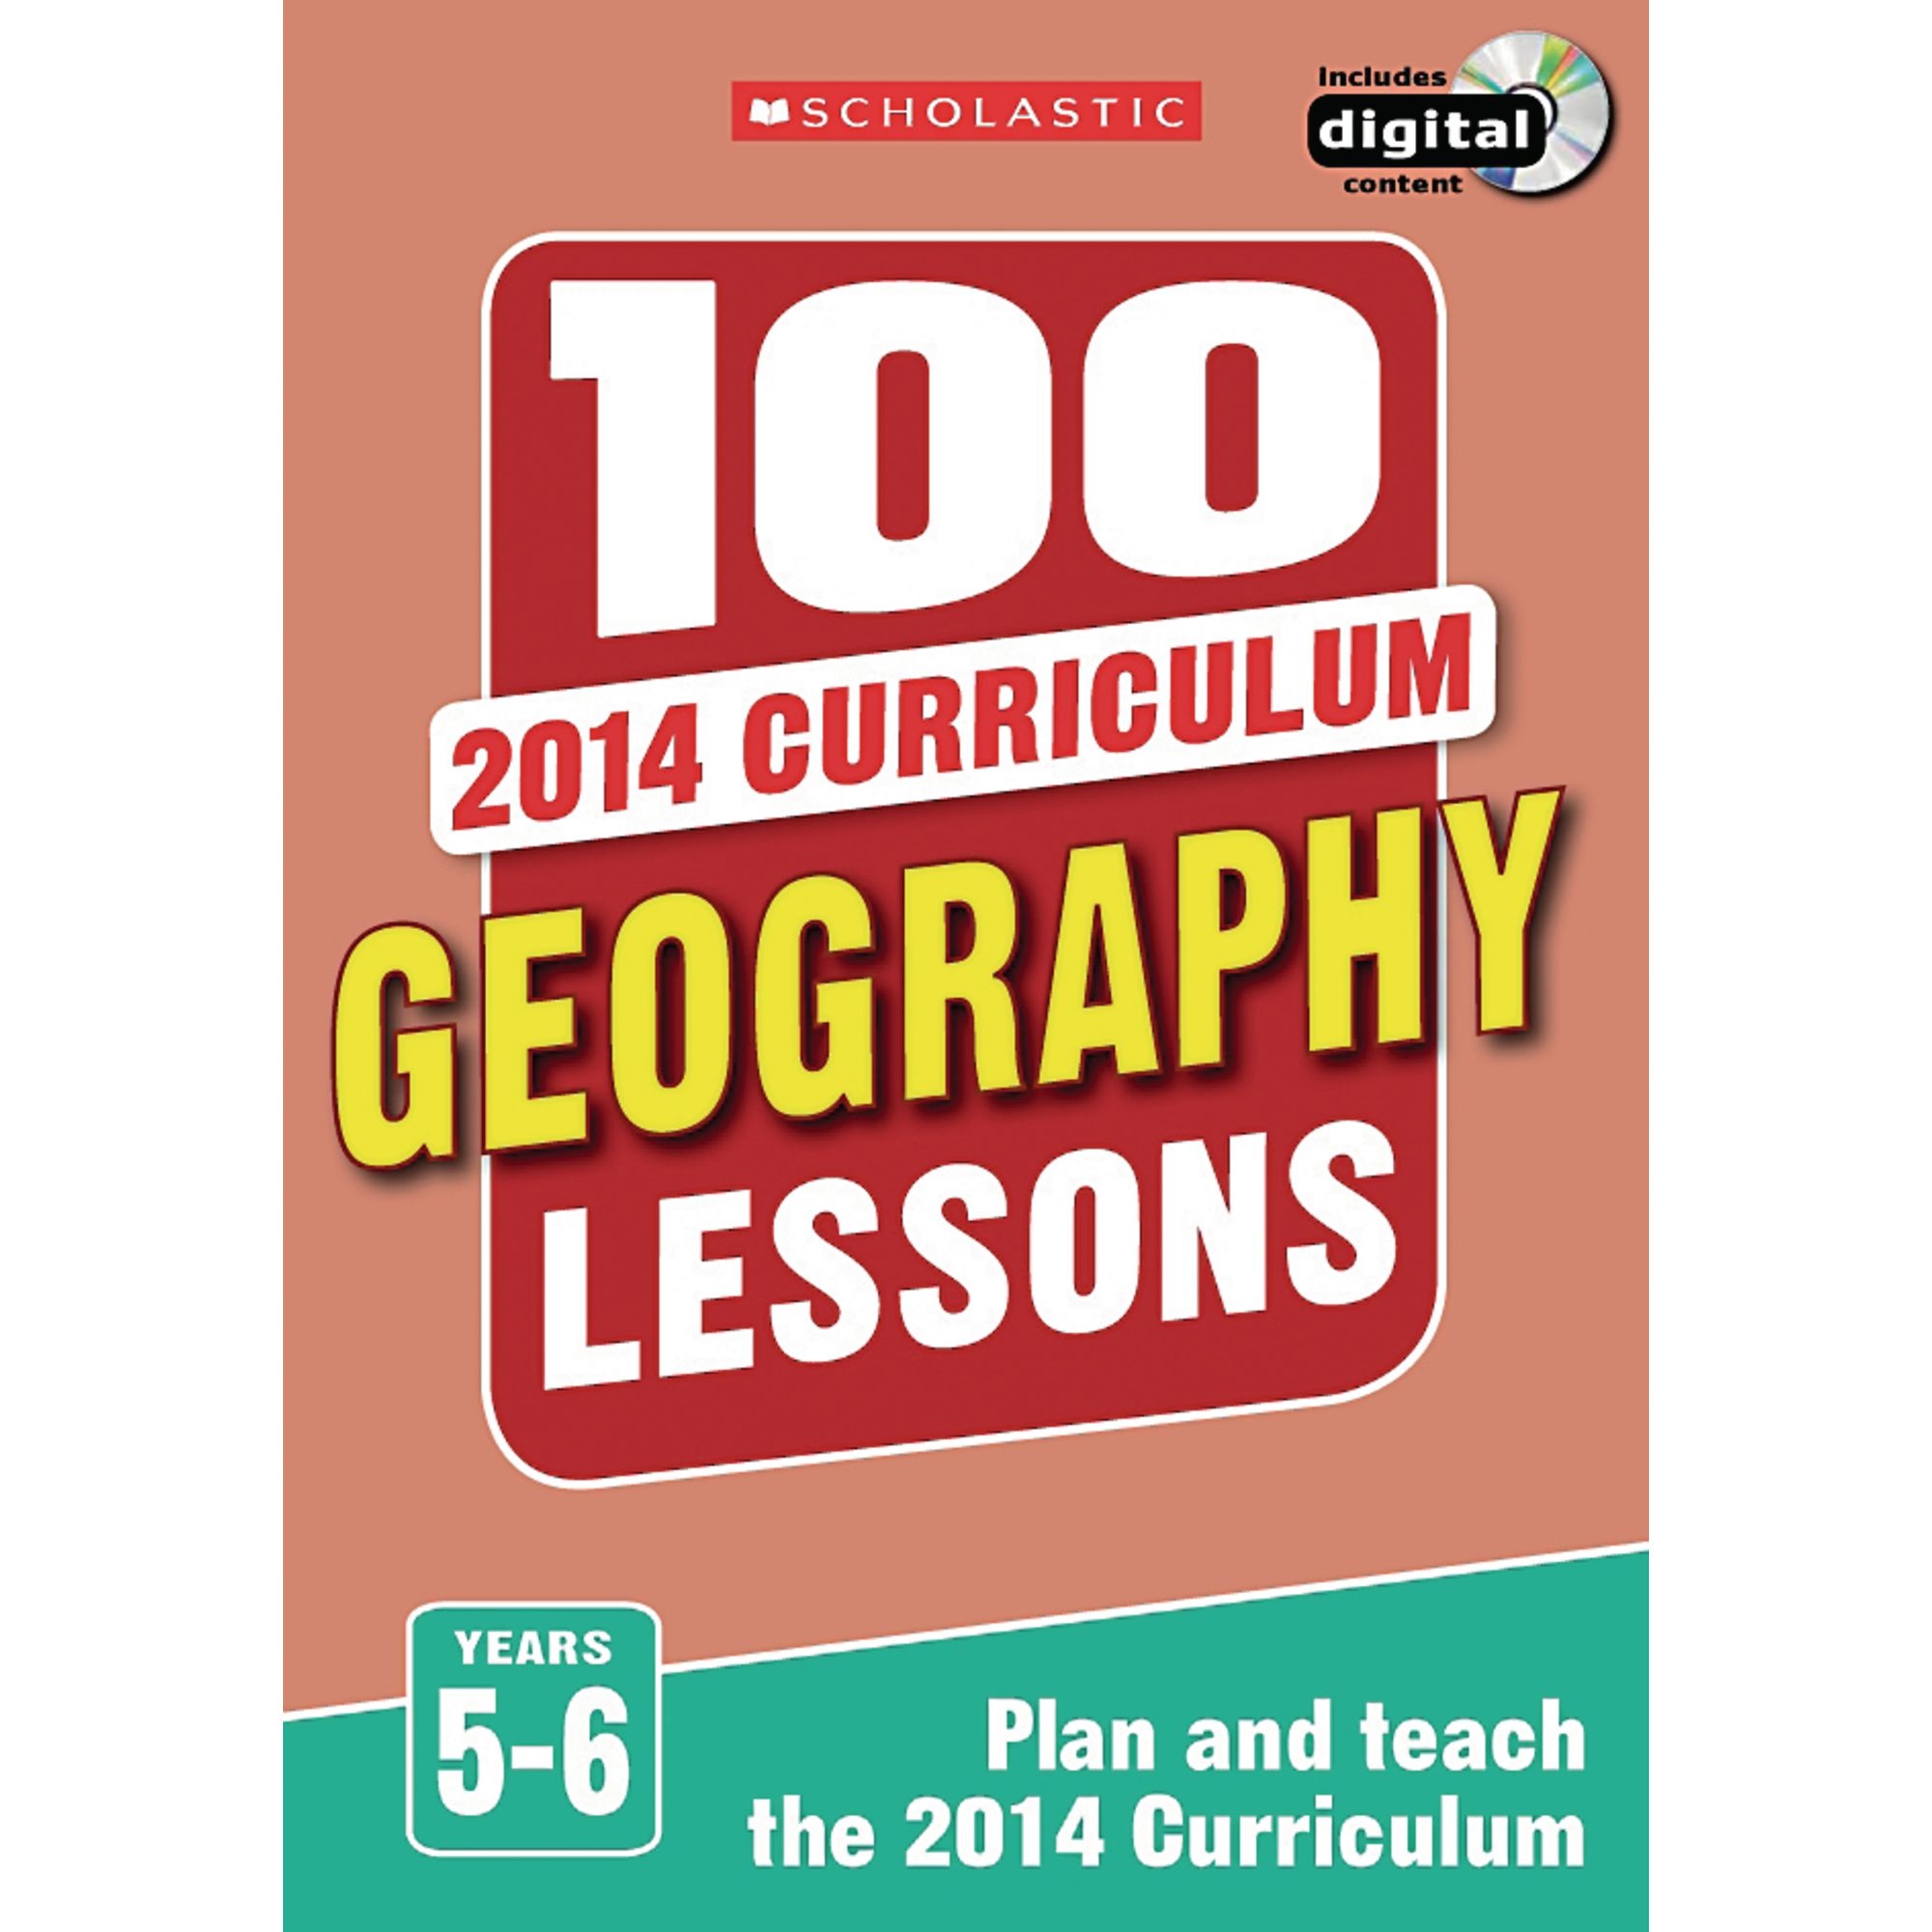 100 Geography Lessons 2014 Curriculum Years 5 - 6